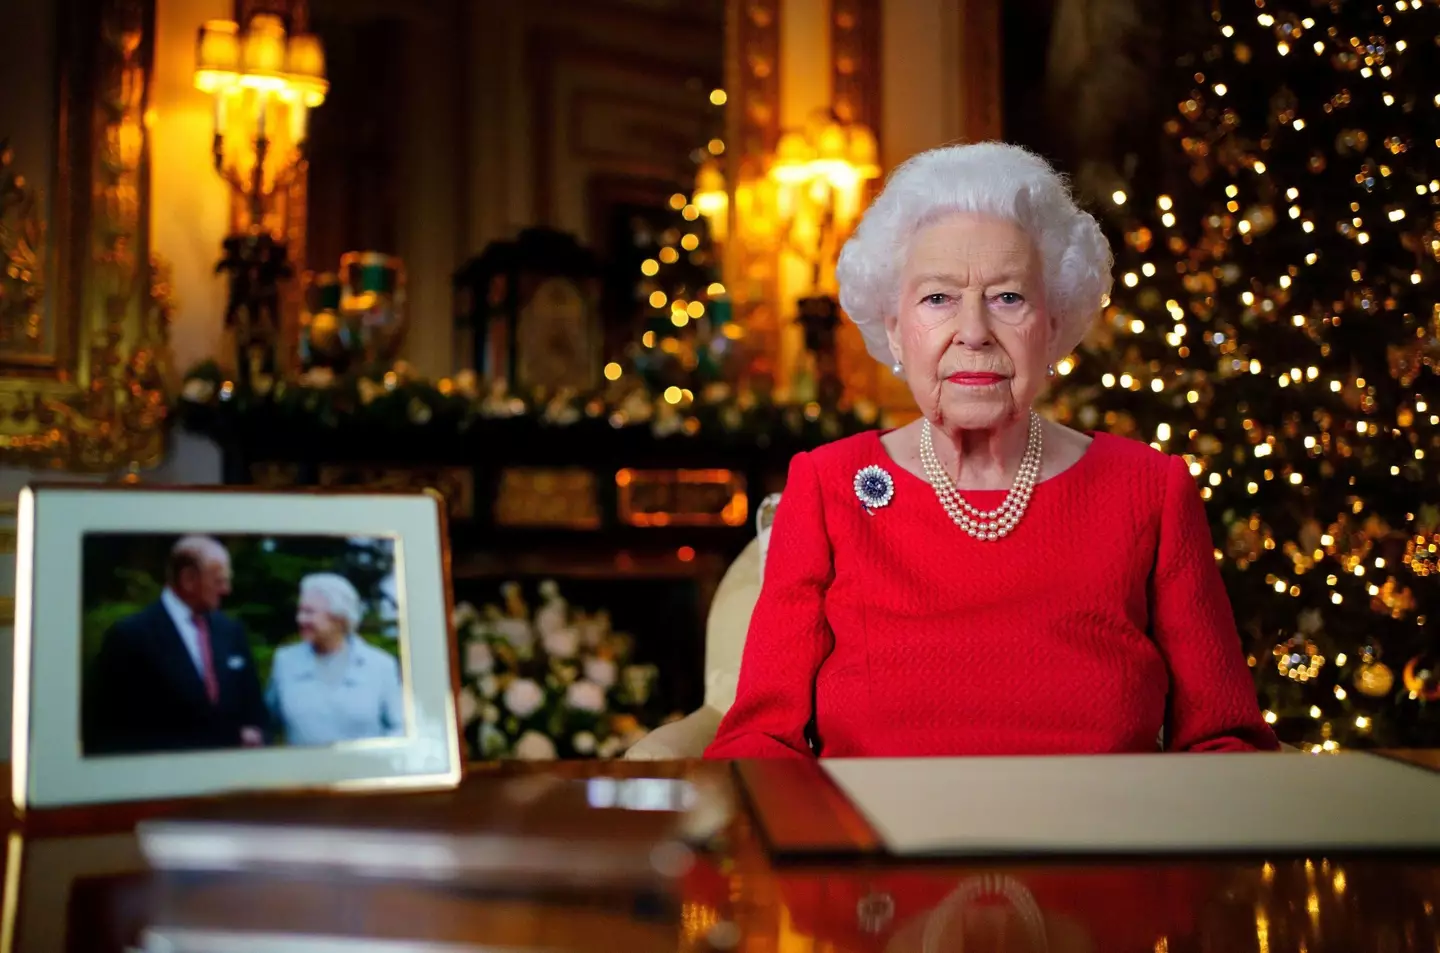 The Queen has been on the throne for 70 years next year.